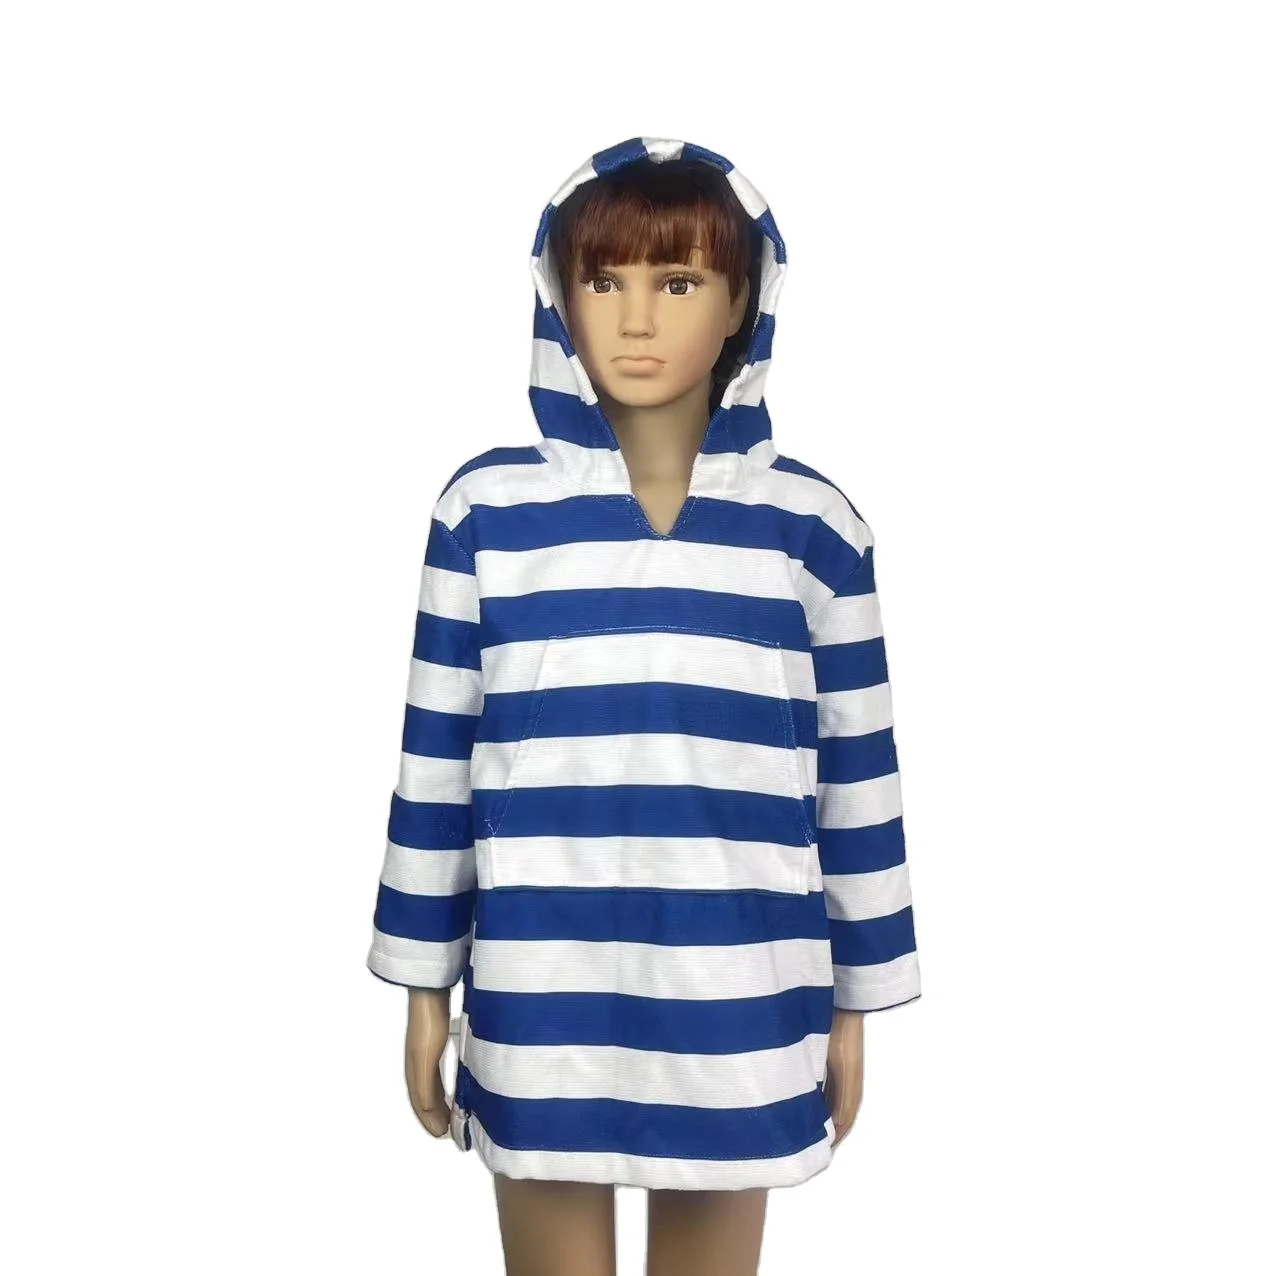 Cotton Surf Beach Hooded Poncho Changing Bath Robe Towel for kids